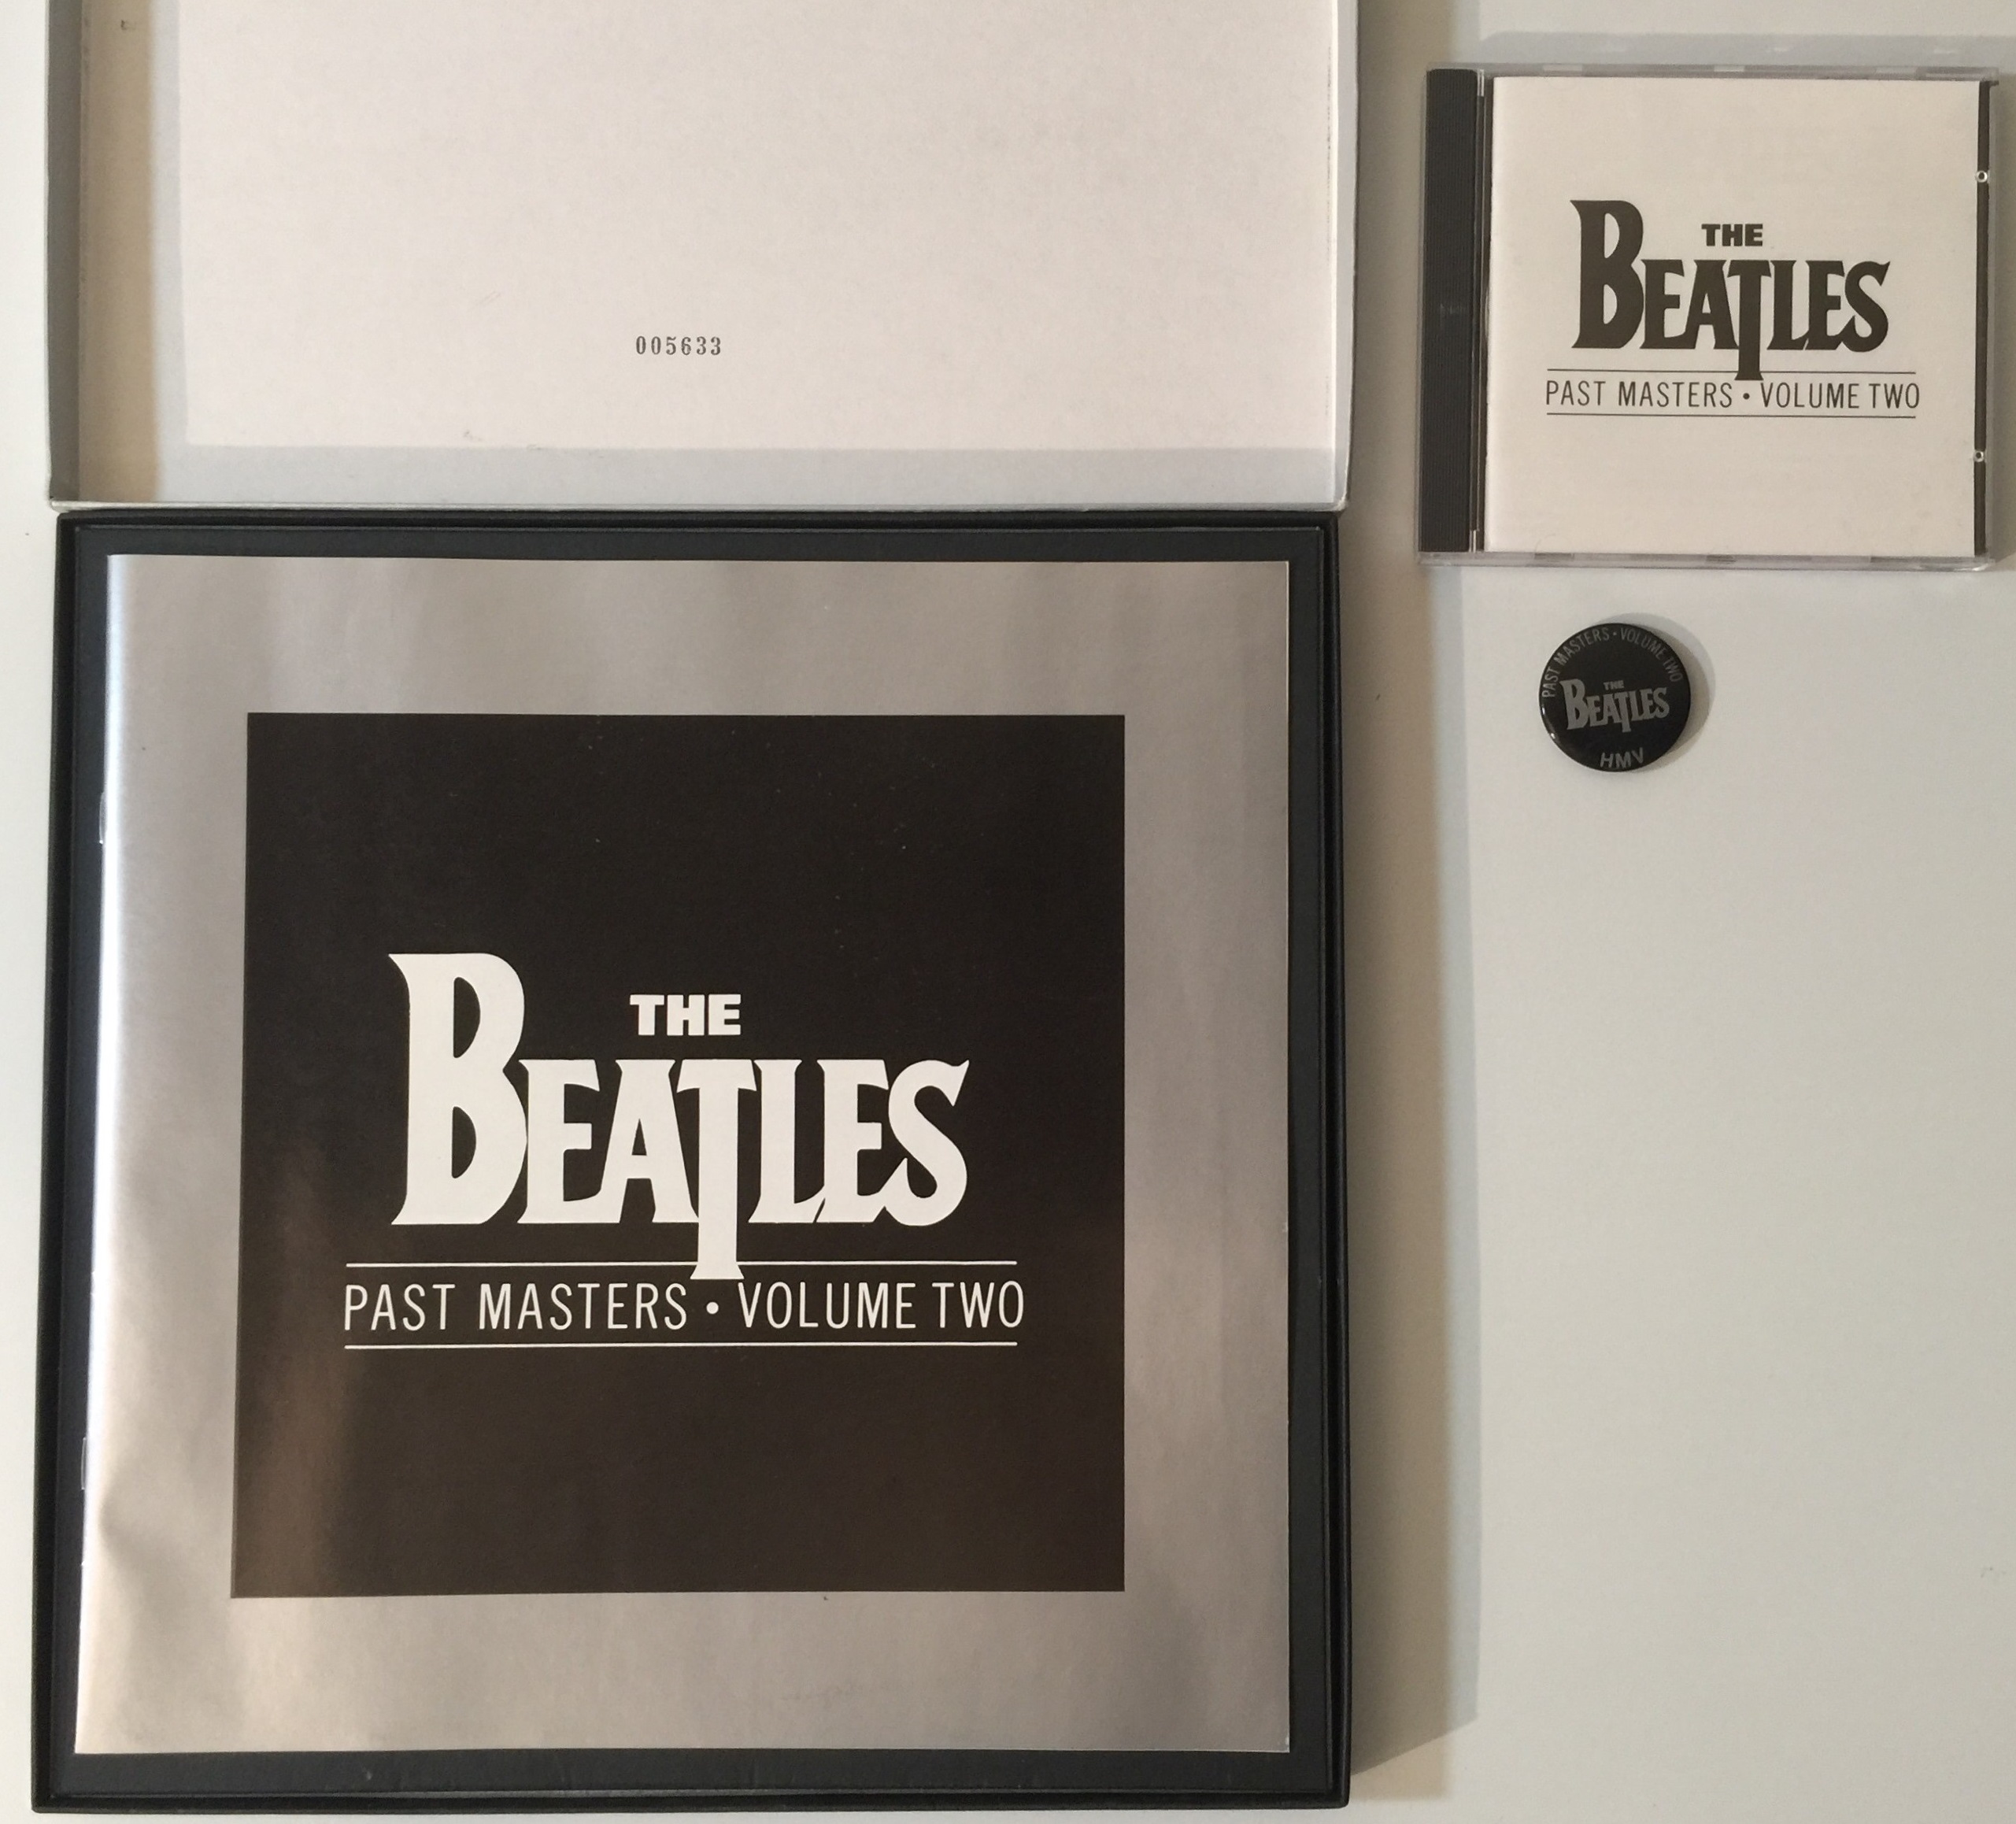 THE BEATLES - ON COMPACT DISC COLLECTION - BOX SETS. - Image 6 of 7